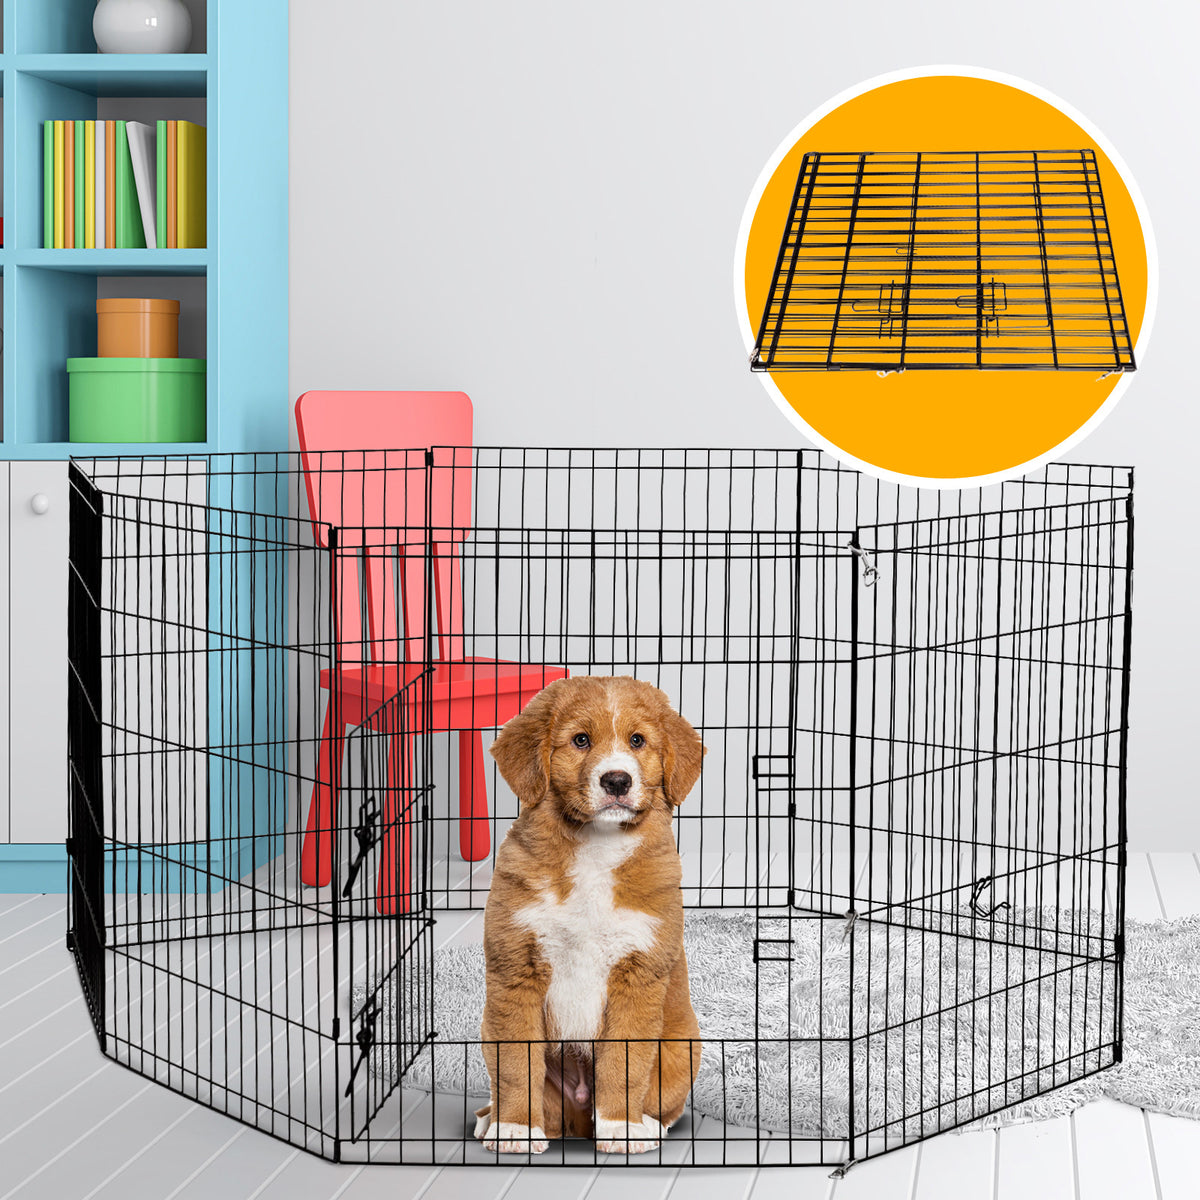 4Paws 8 Panel Playpen Puppy Exercise Fence Cage Enclosure Pets Black All Sizes - 30" - Black